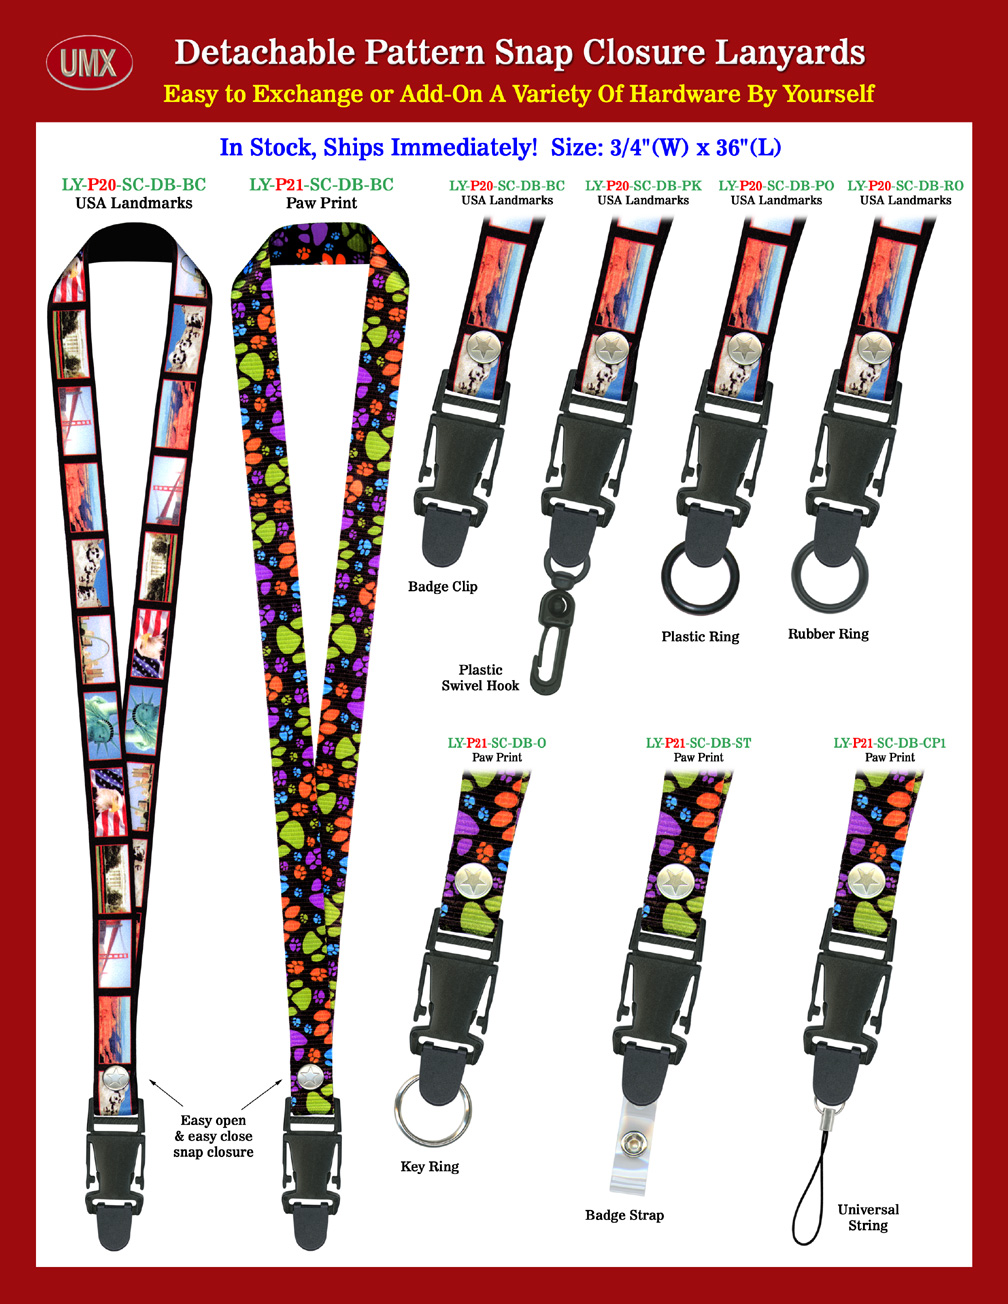 3/4" USA Landmark and Paw Print Quick Release Snap Closure Lanyards.